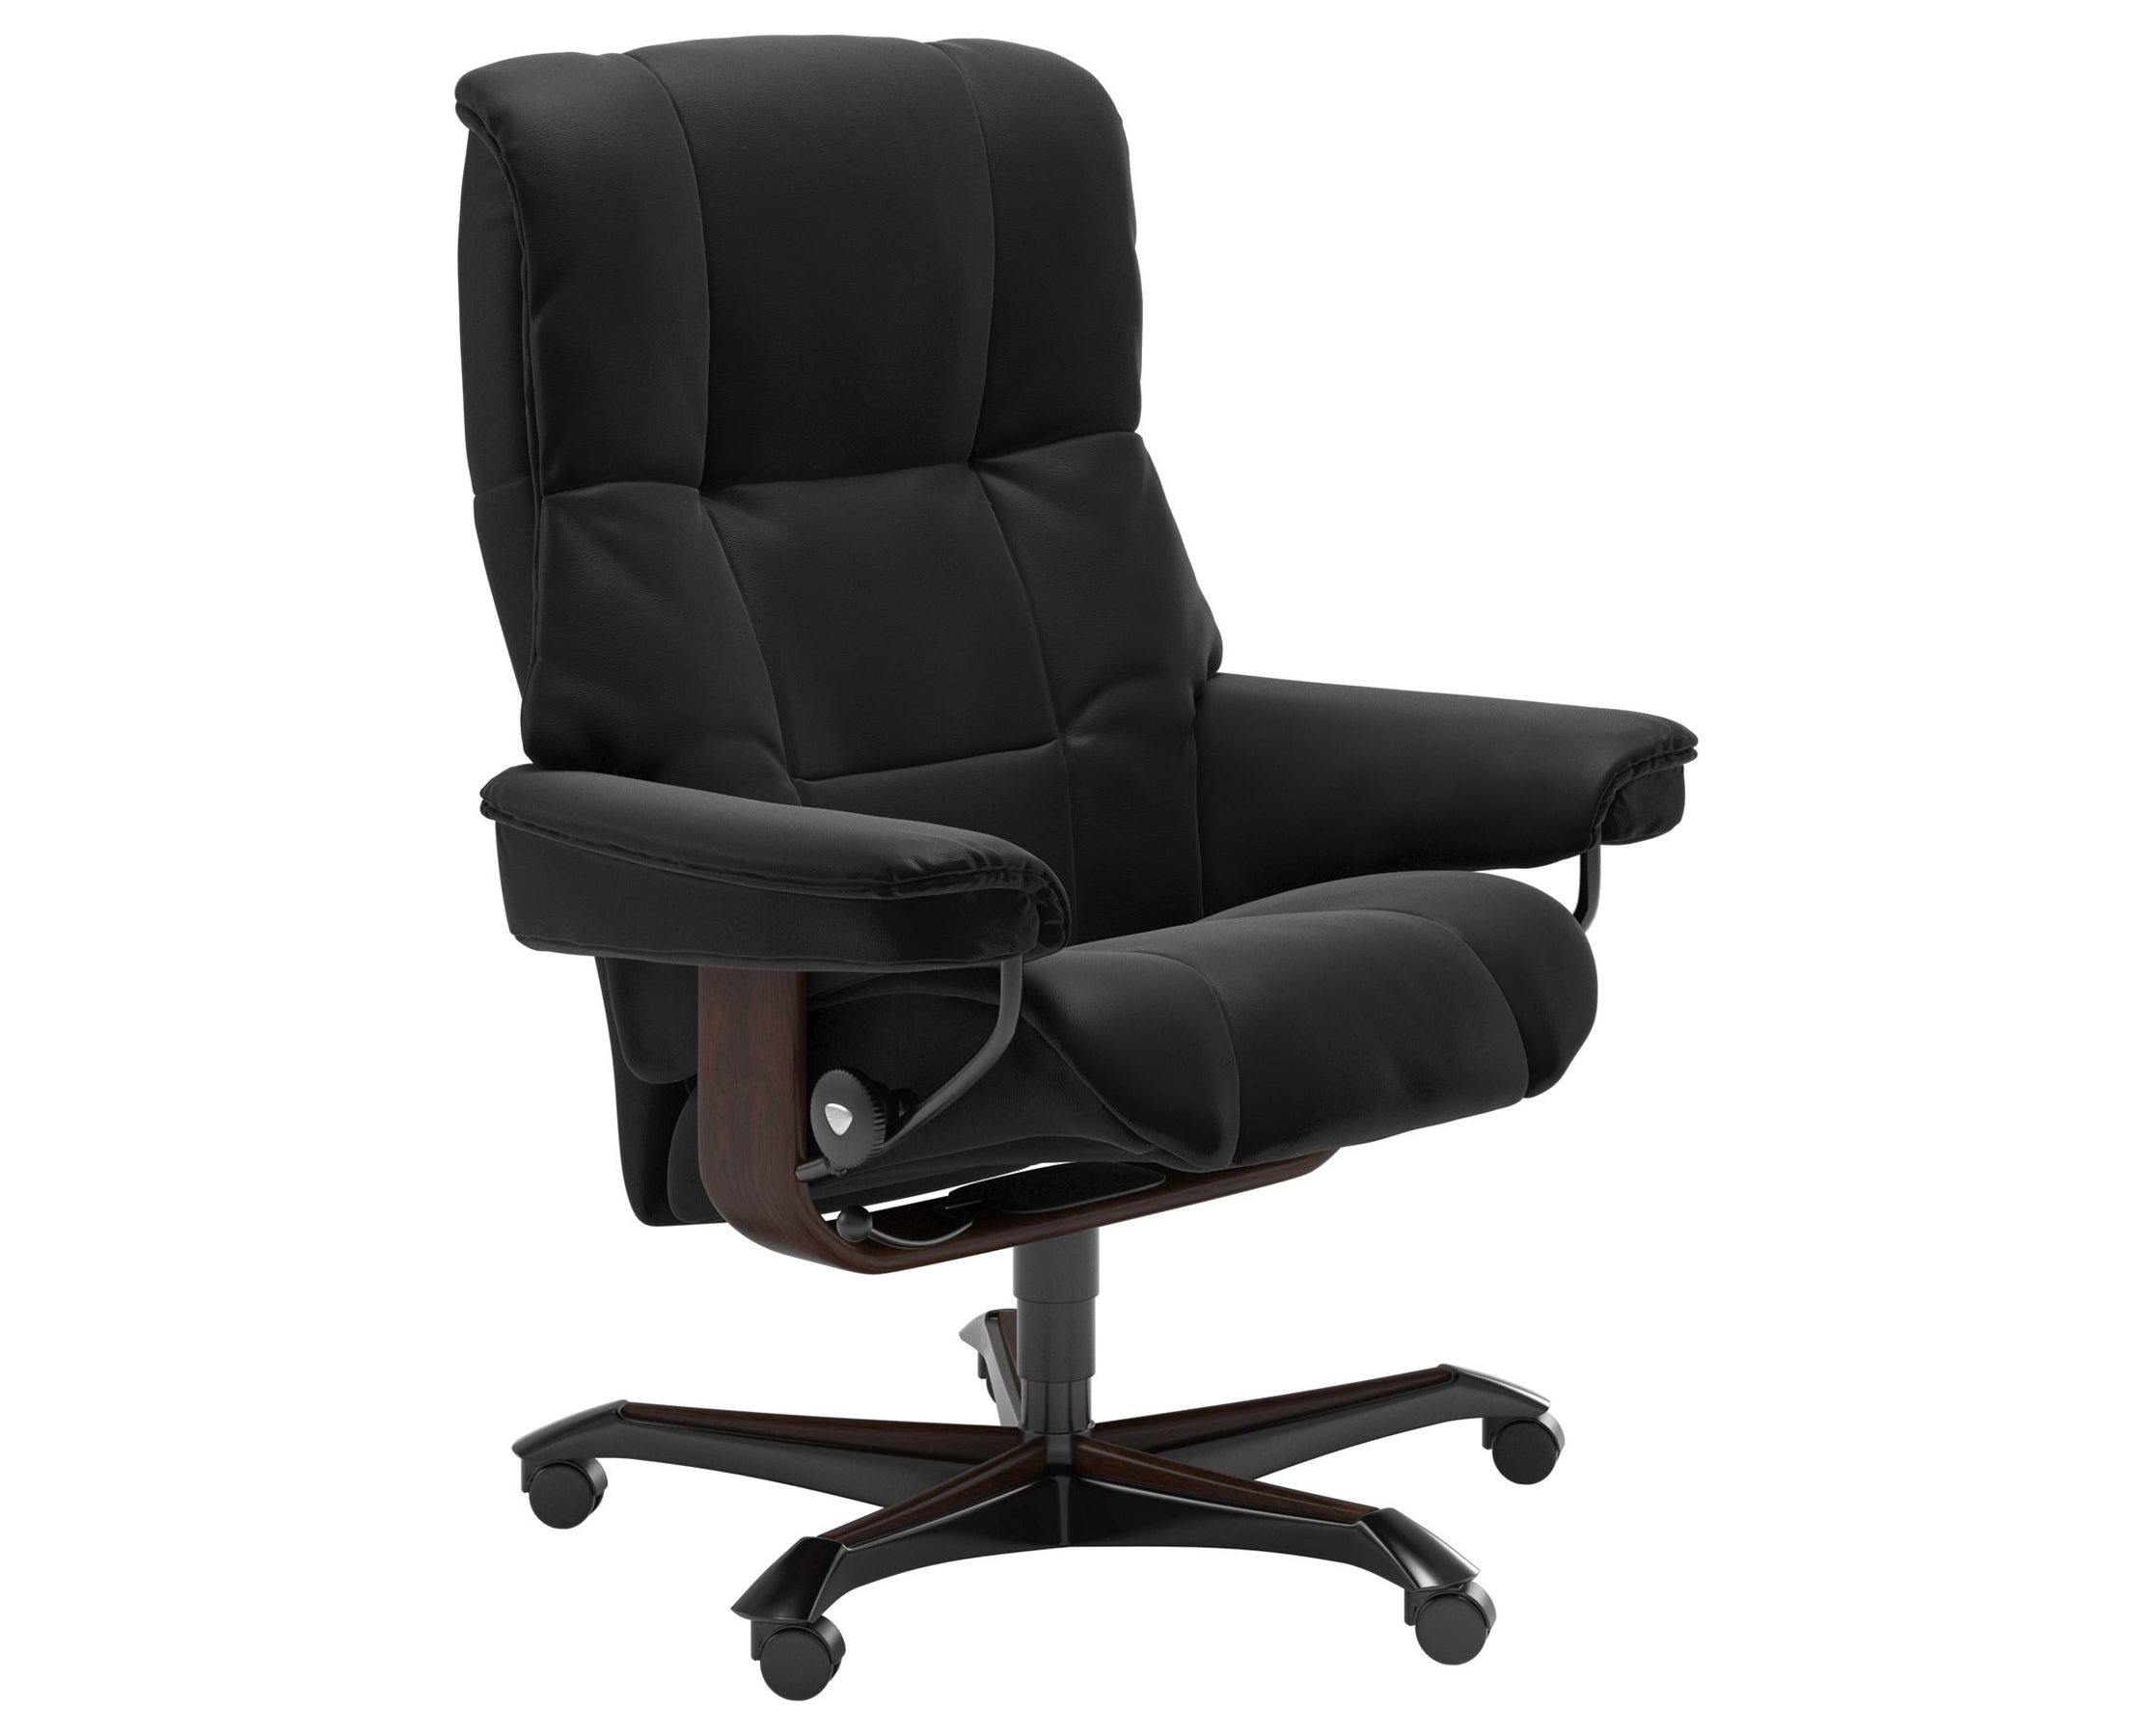 Paloma Leather Black M and Brown Base | Stressless Mayfair Home Office Chair | Valley Ridge Furniture